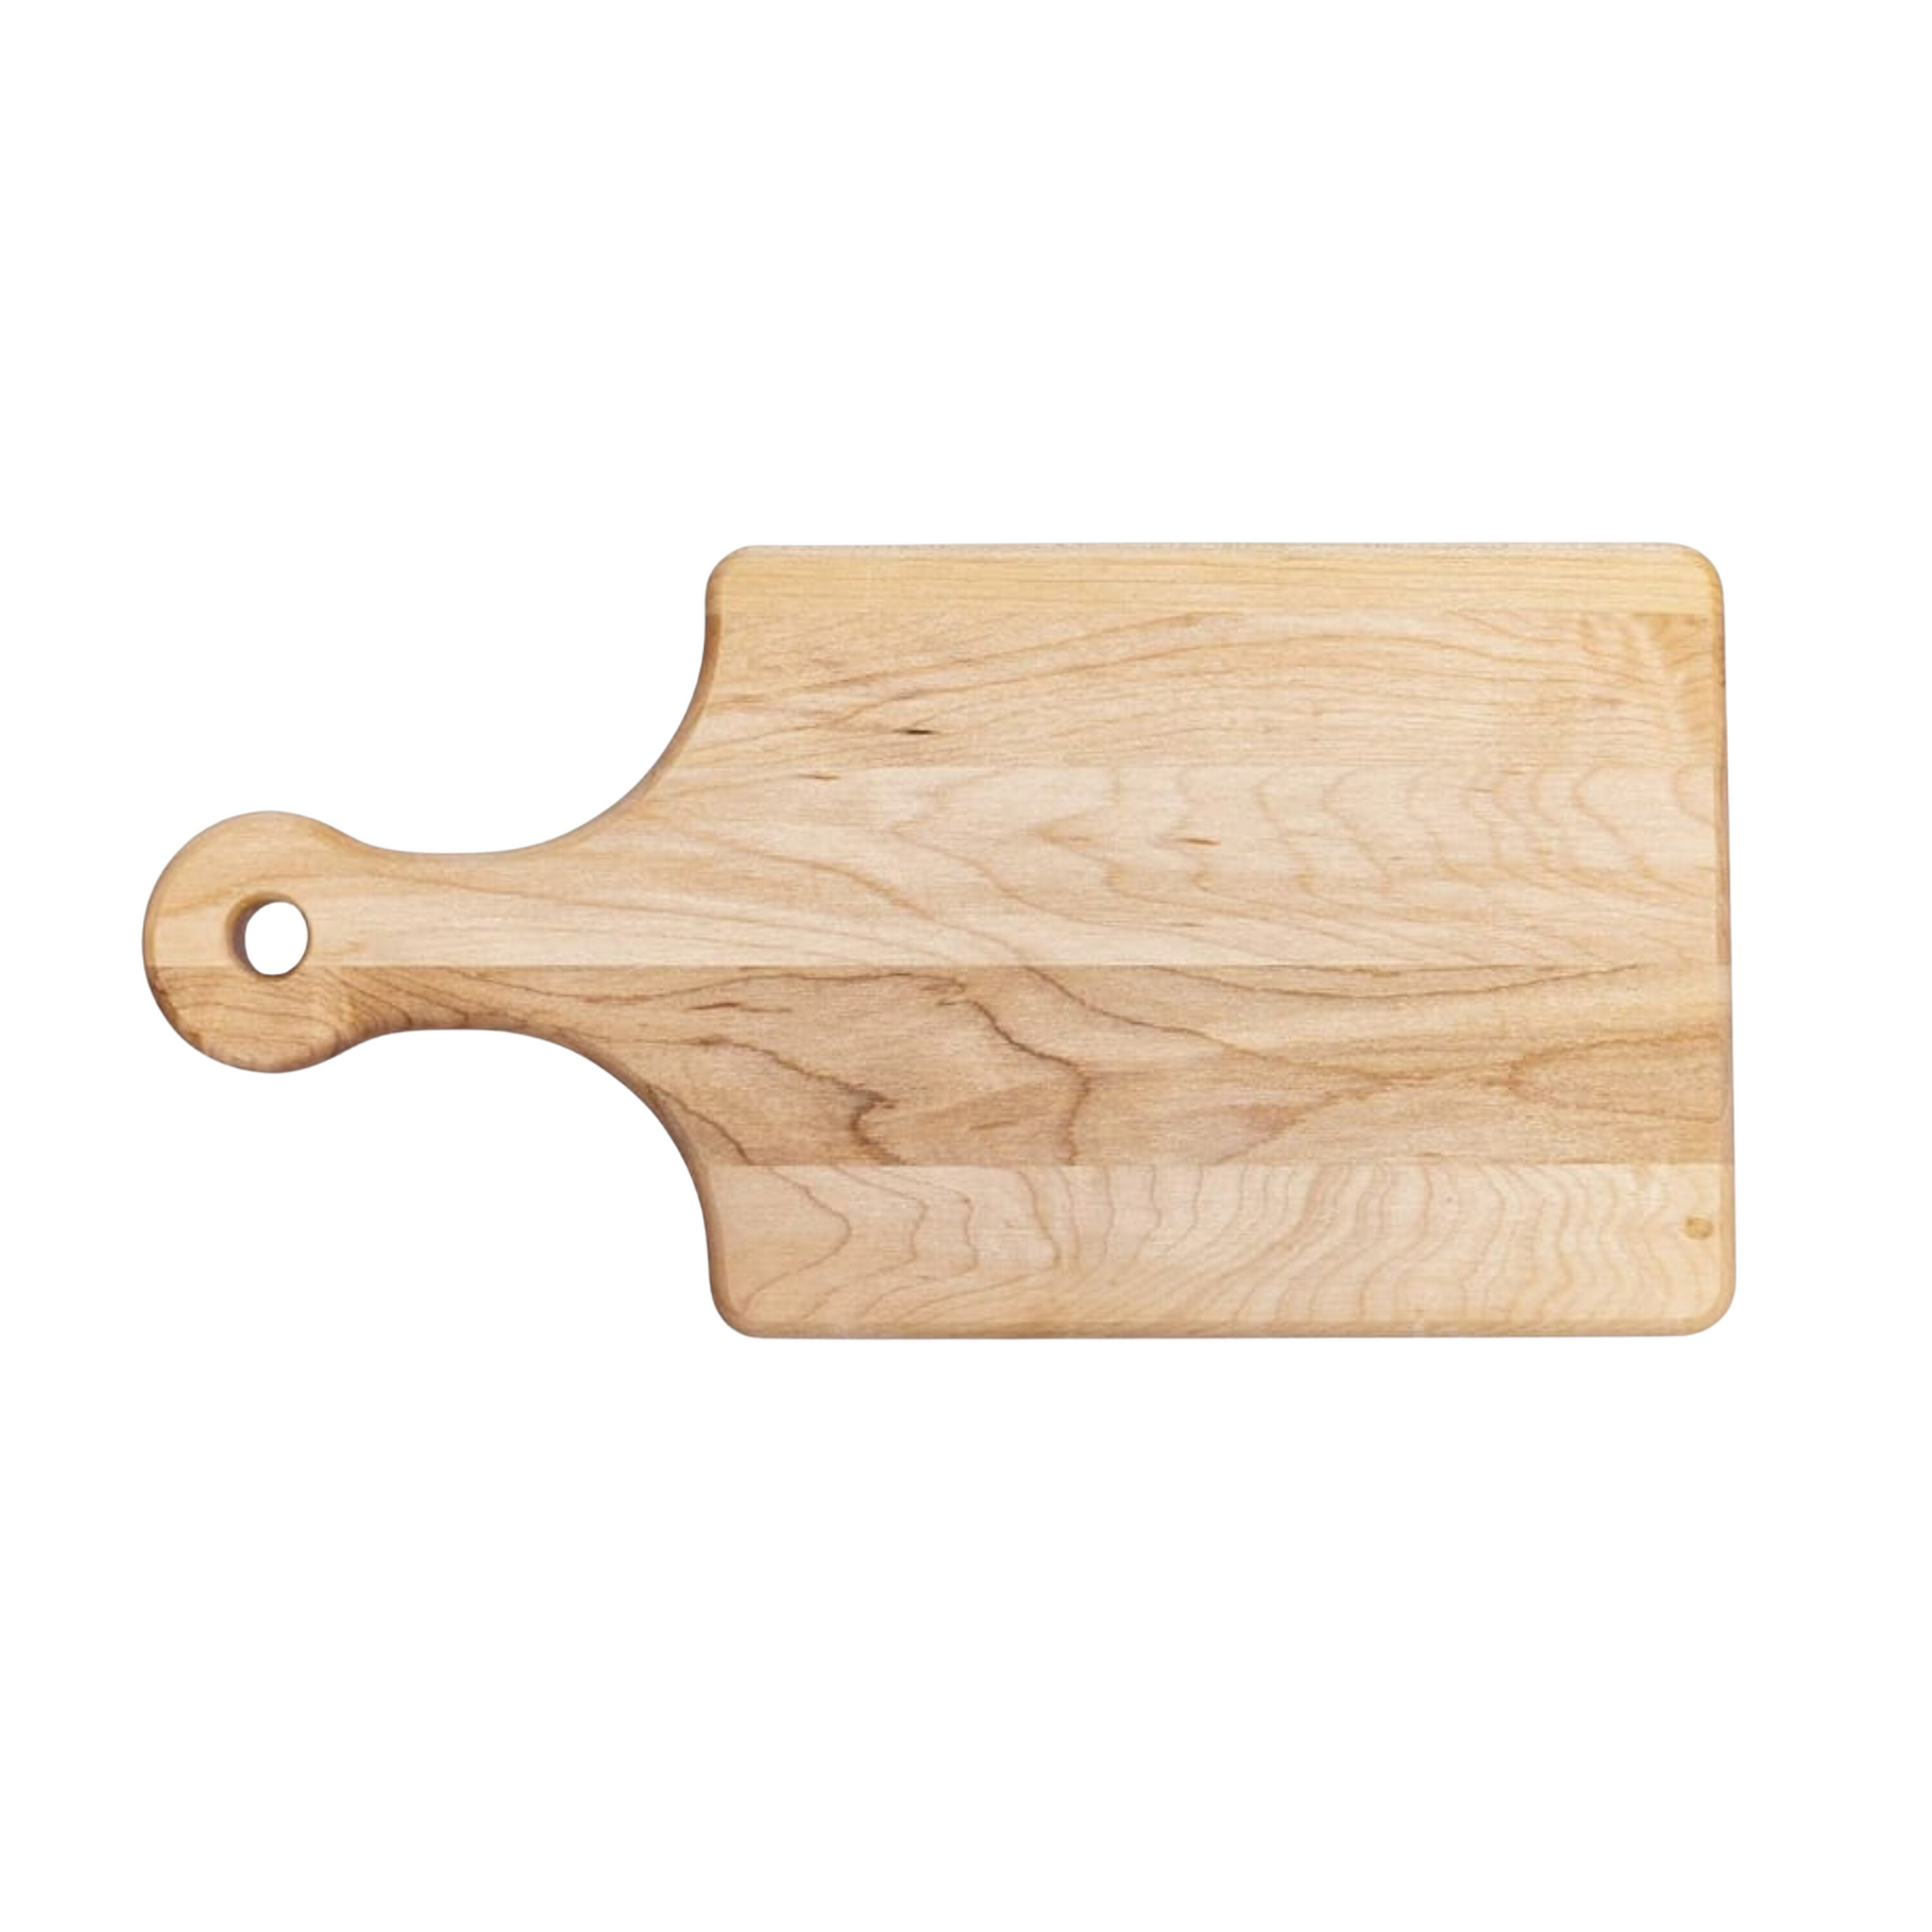 It's Not Drinking Alone If Cat Is Home Cutting Board - Premium Cutting Boards from Hipster Lasers - Just $40! Shop now at Hipster Lasers